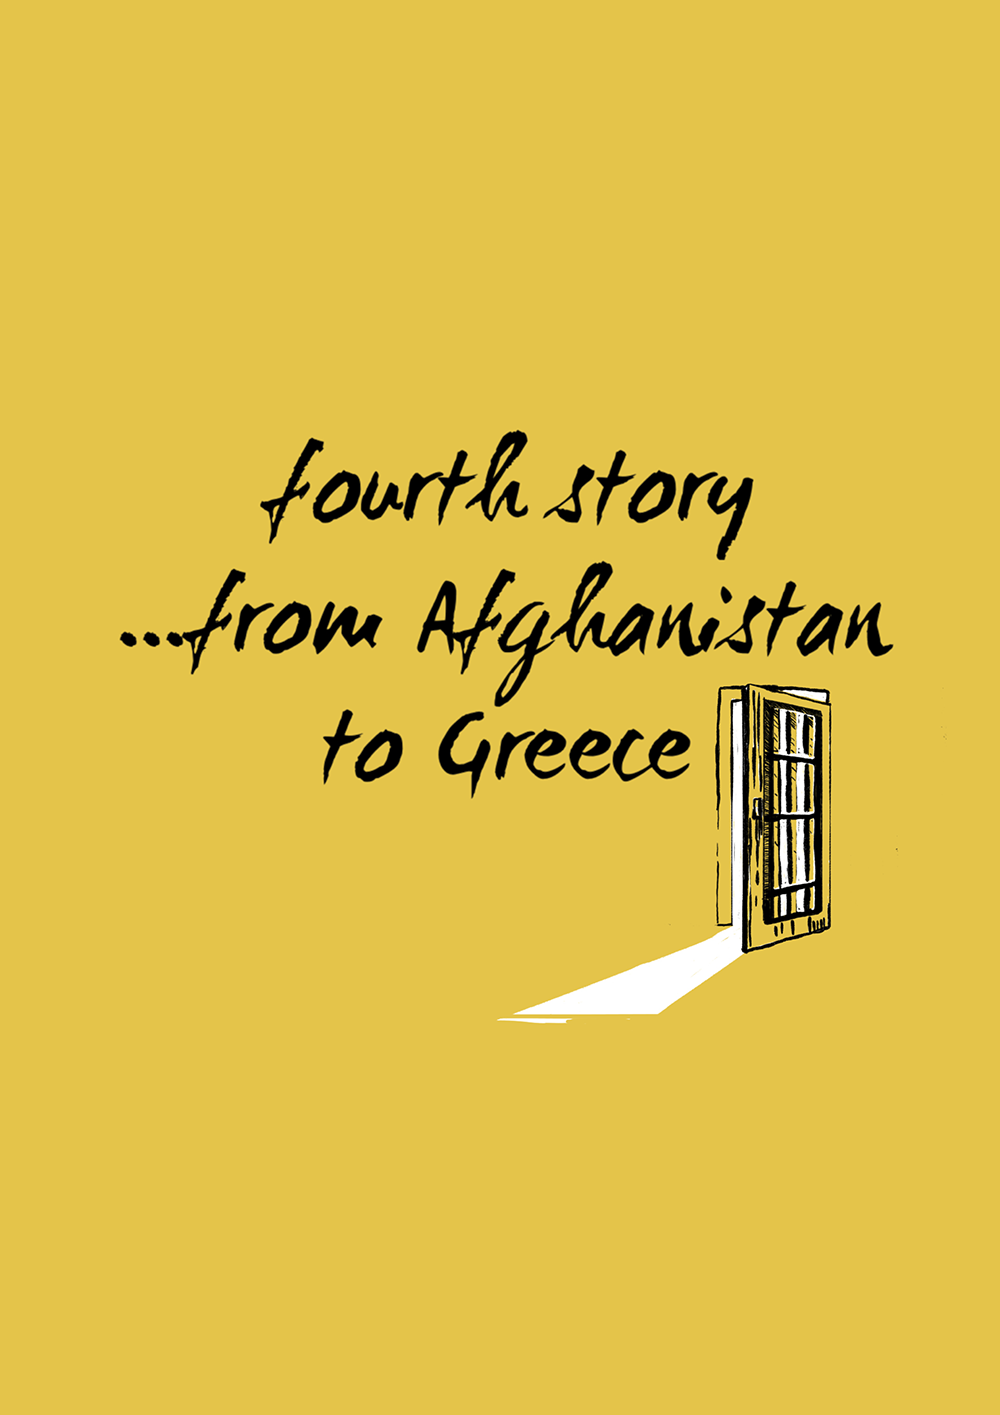 Counter stories: Fourth story ... from Afghanistan to Greece page 001